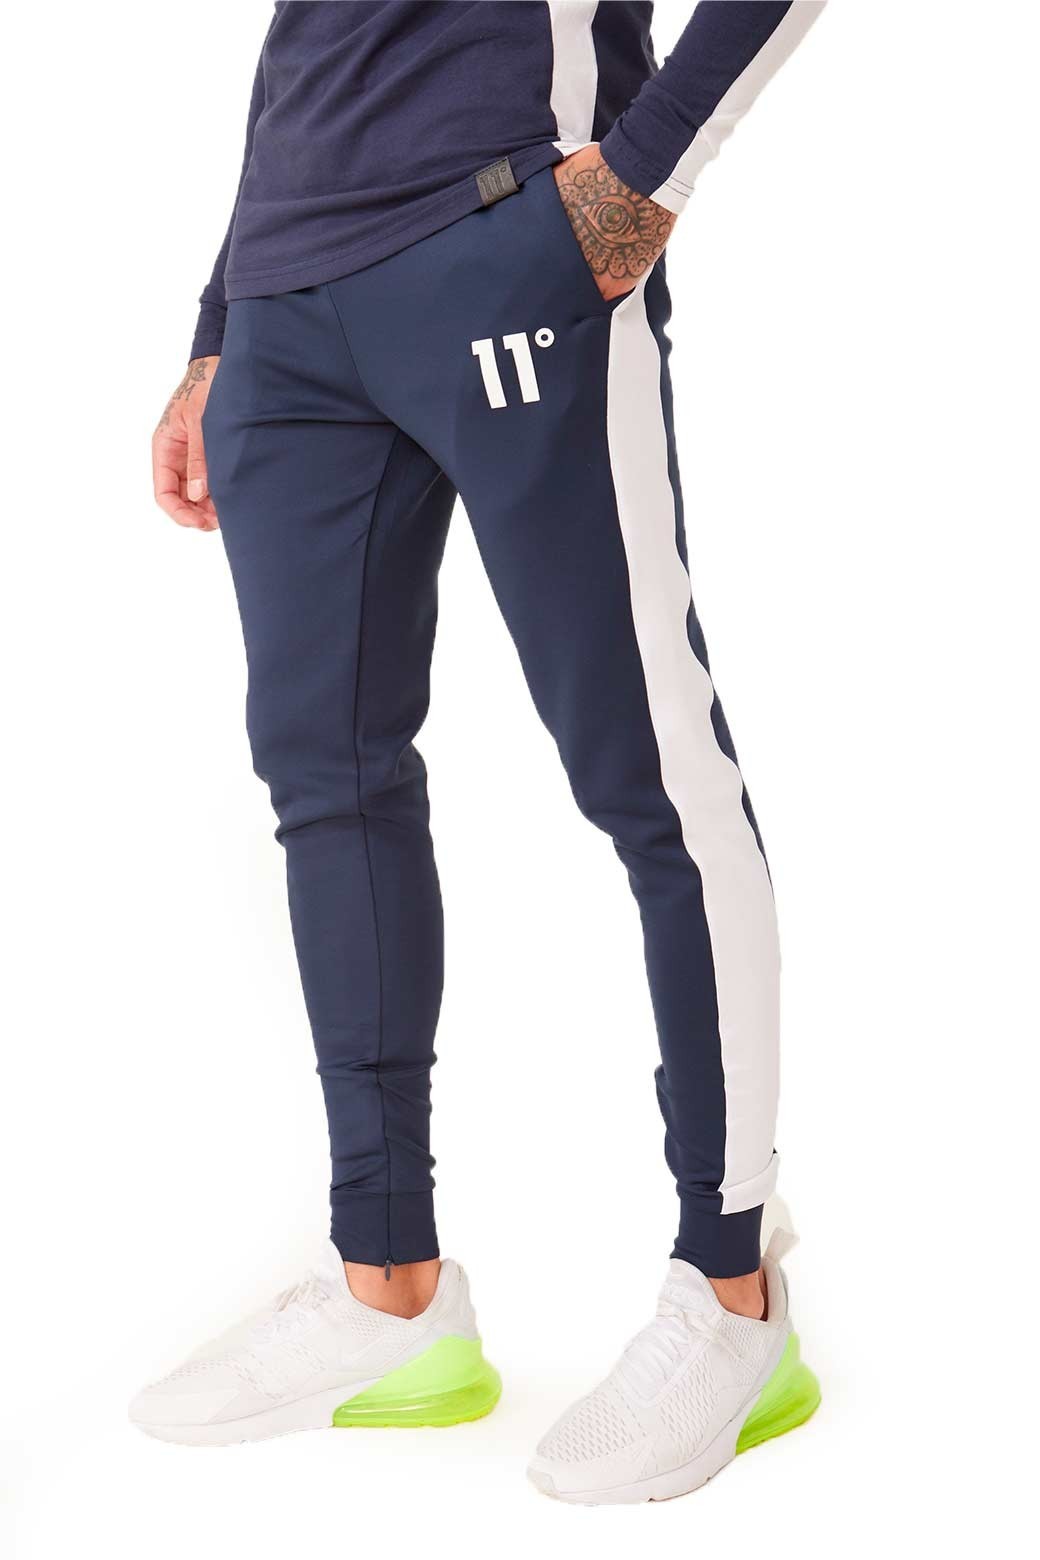 chandal 11 degrees mujer